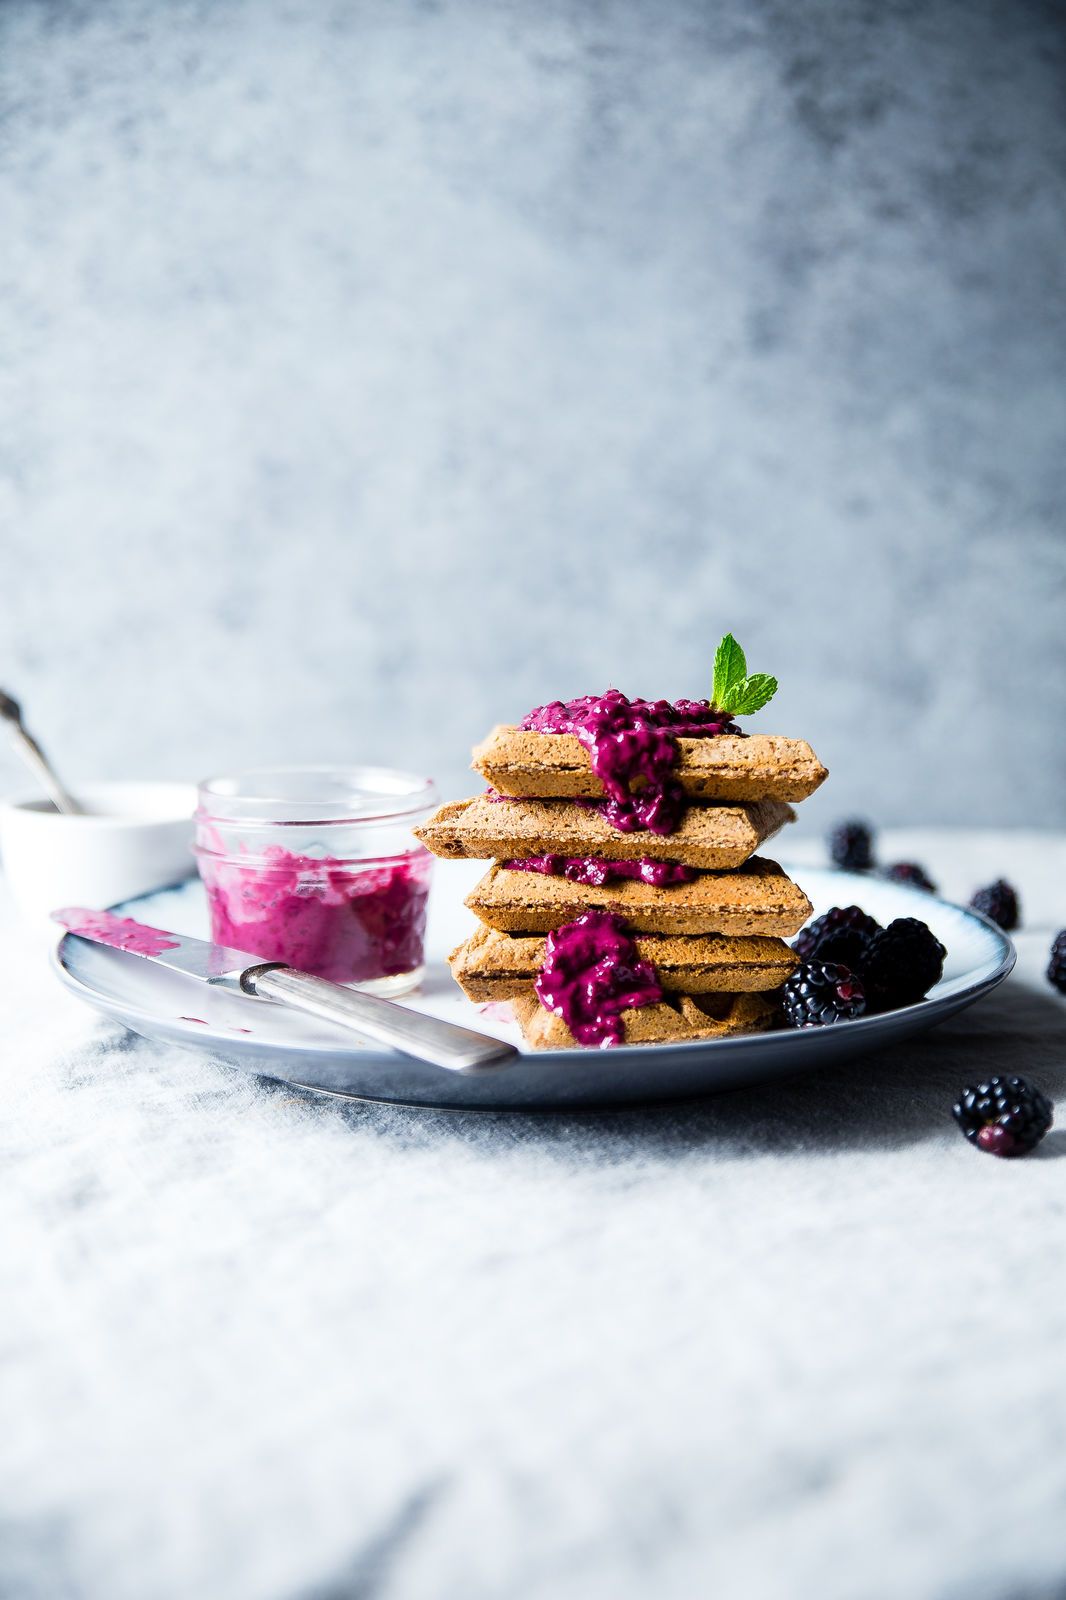 Food photos from the Unsplash Awards image 2